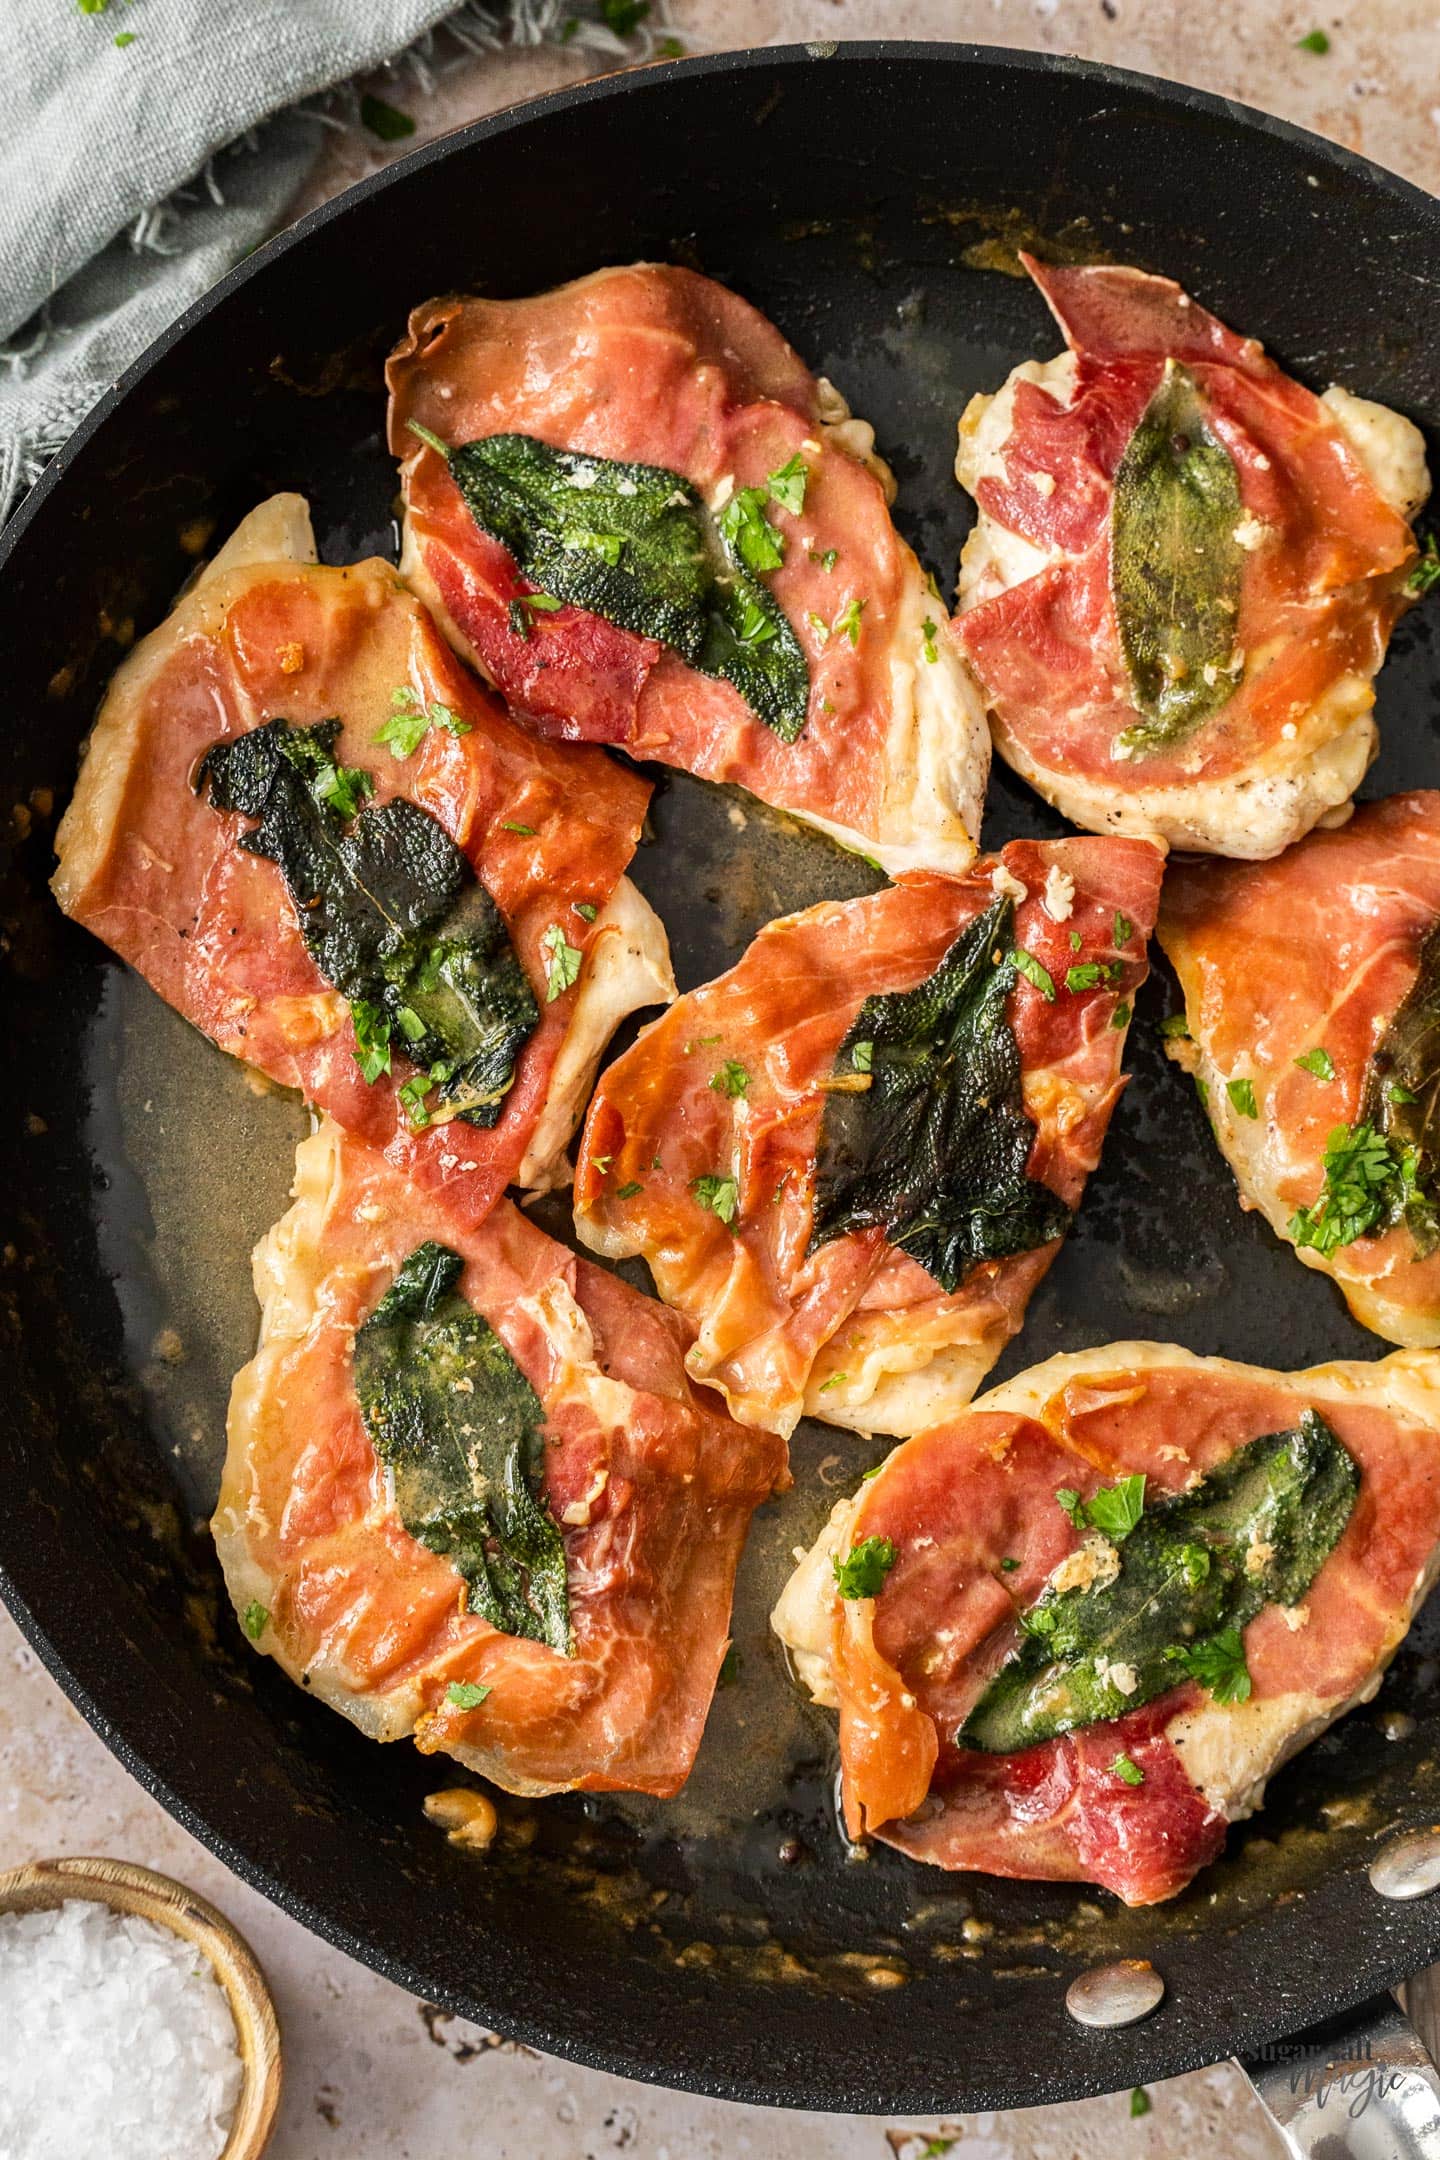 7 pieces of saltimbocca chicken in a skillet.